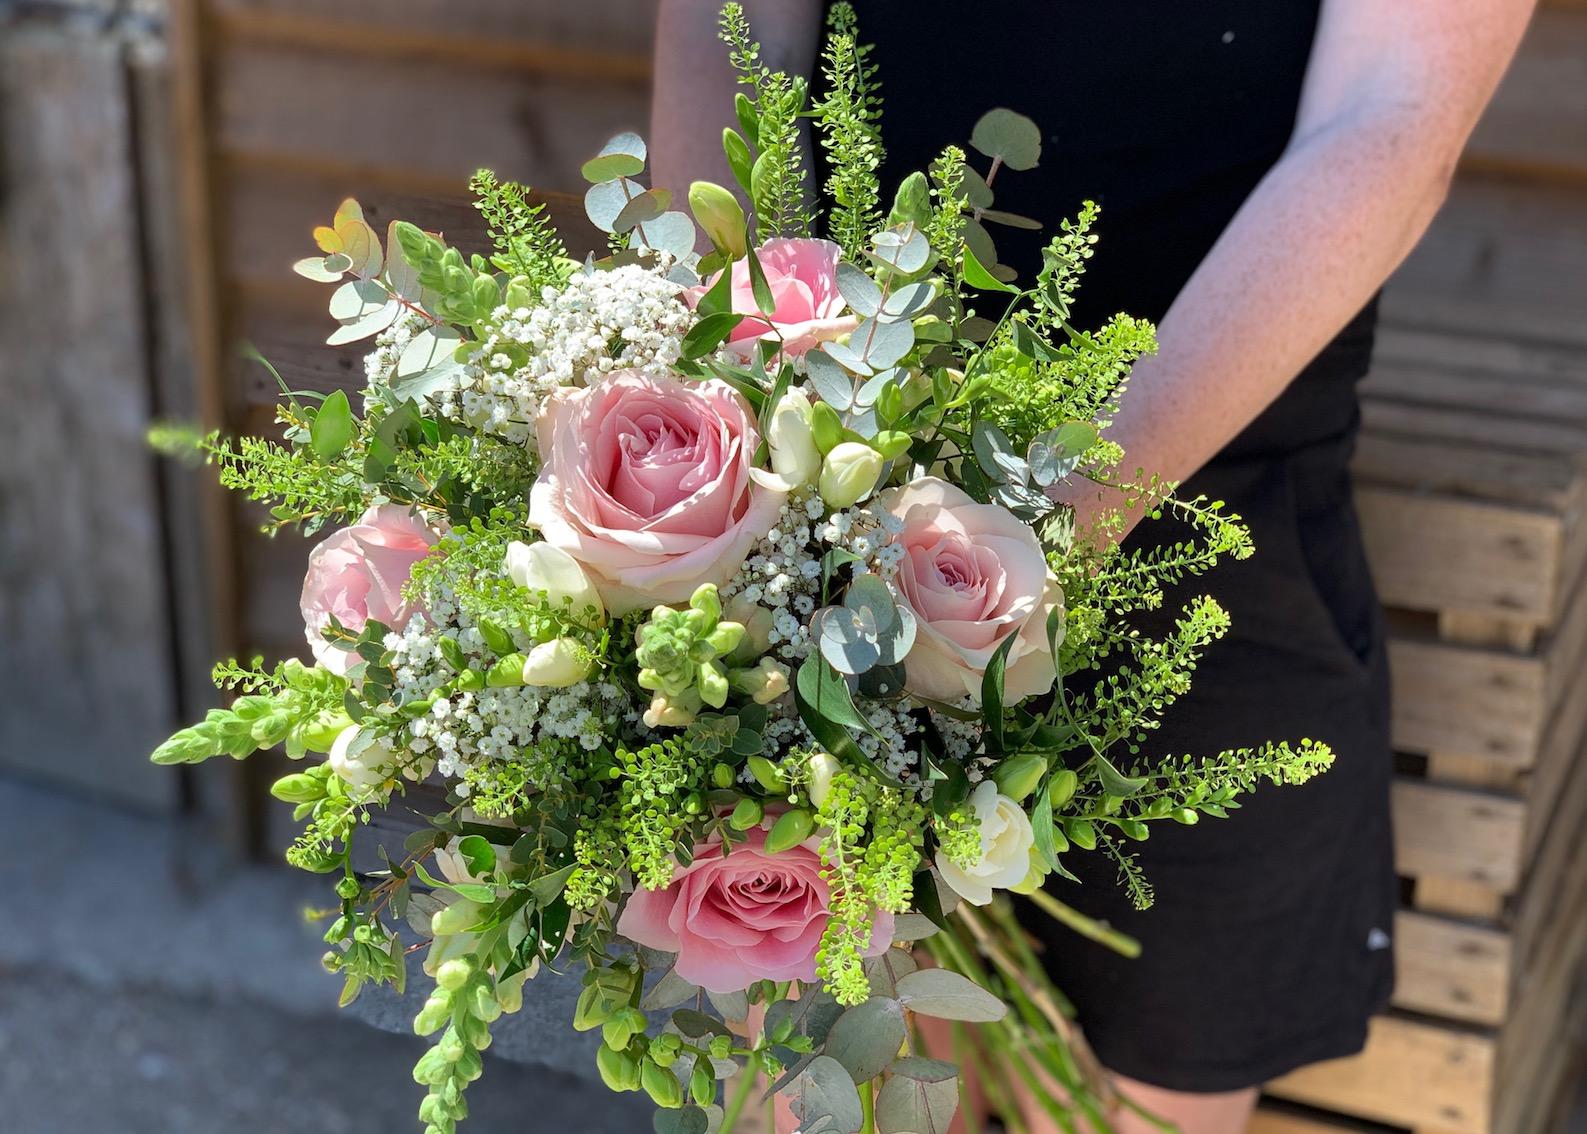 Pink and White Bridal Bouquet